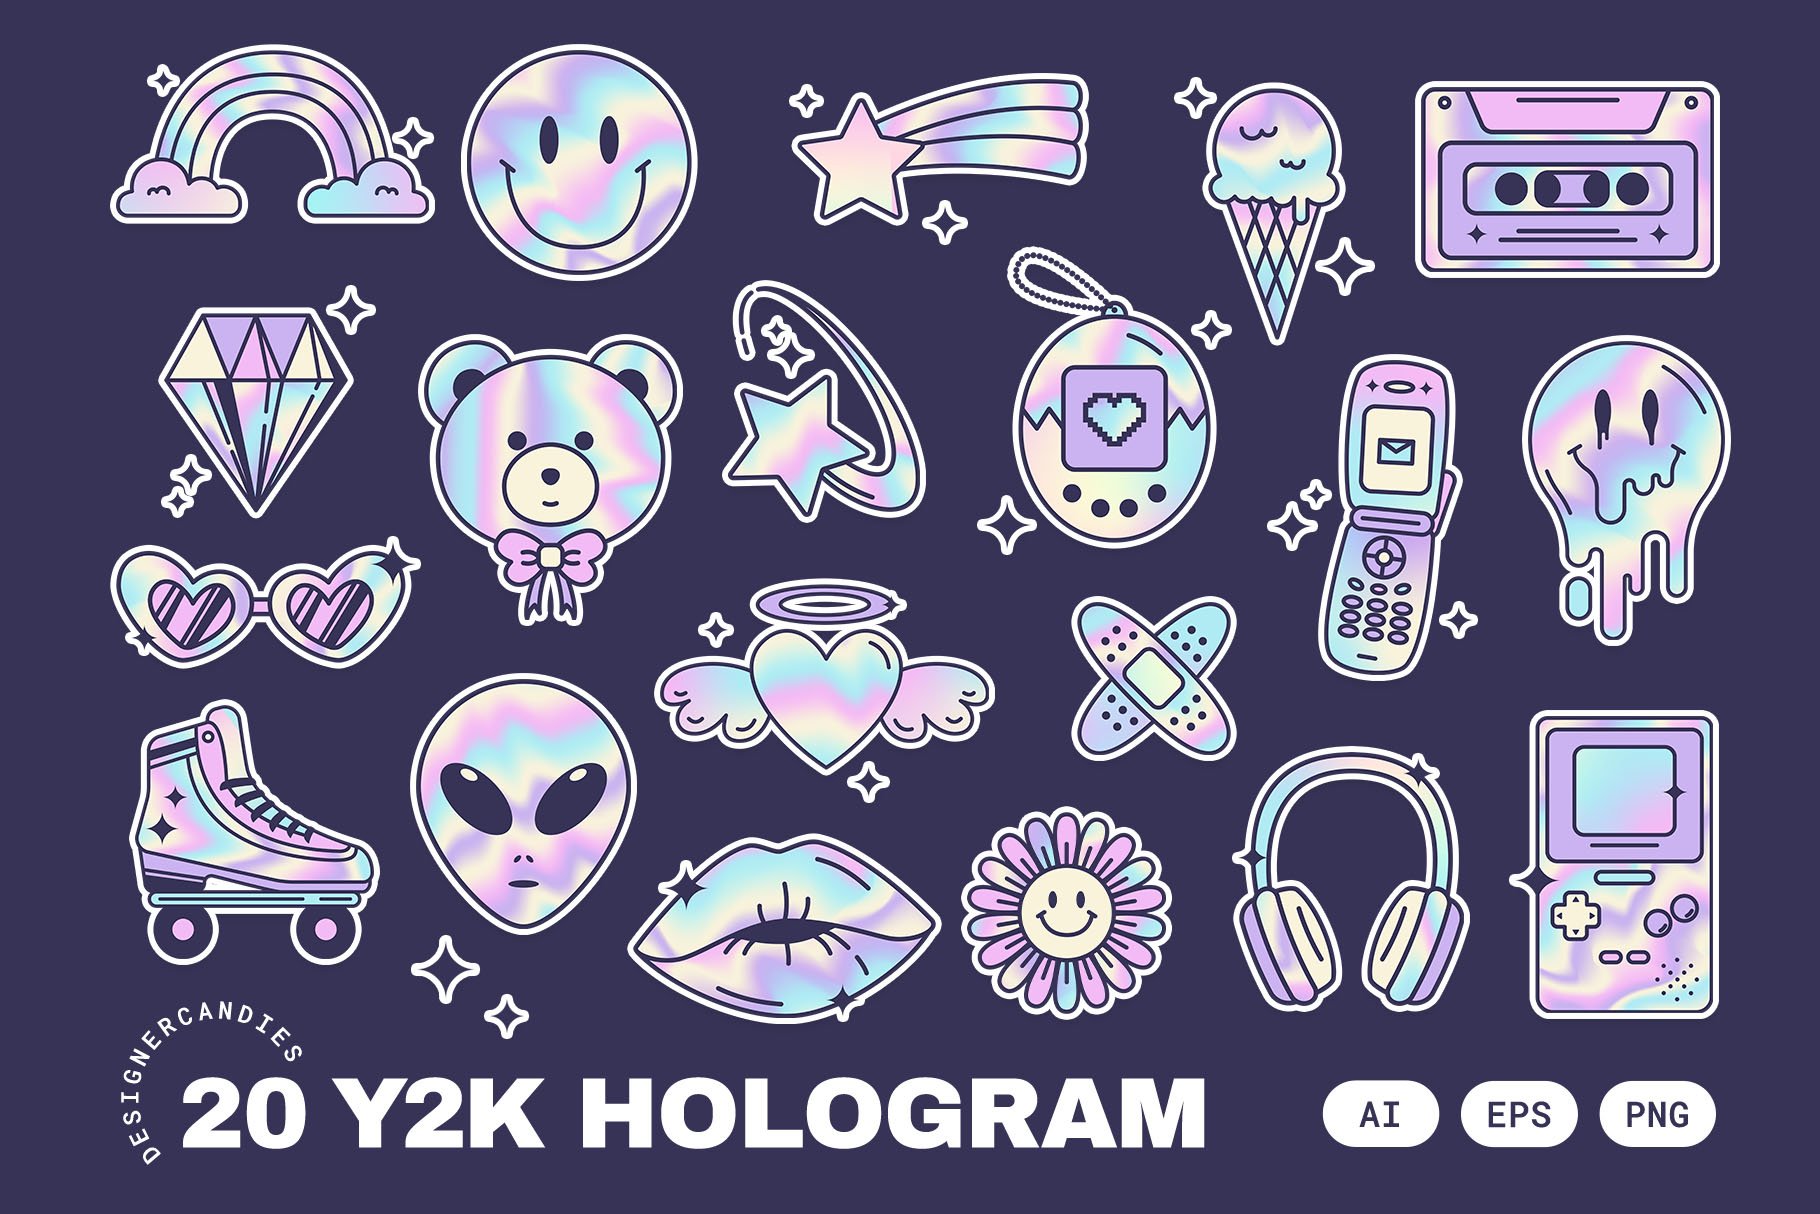 Y2K Holographic Stickers Illustrations Set - Design Cuts